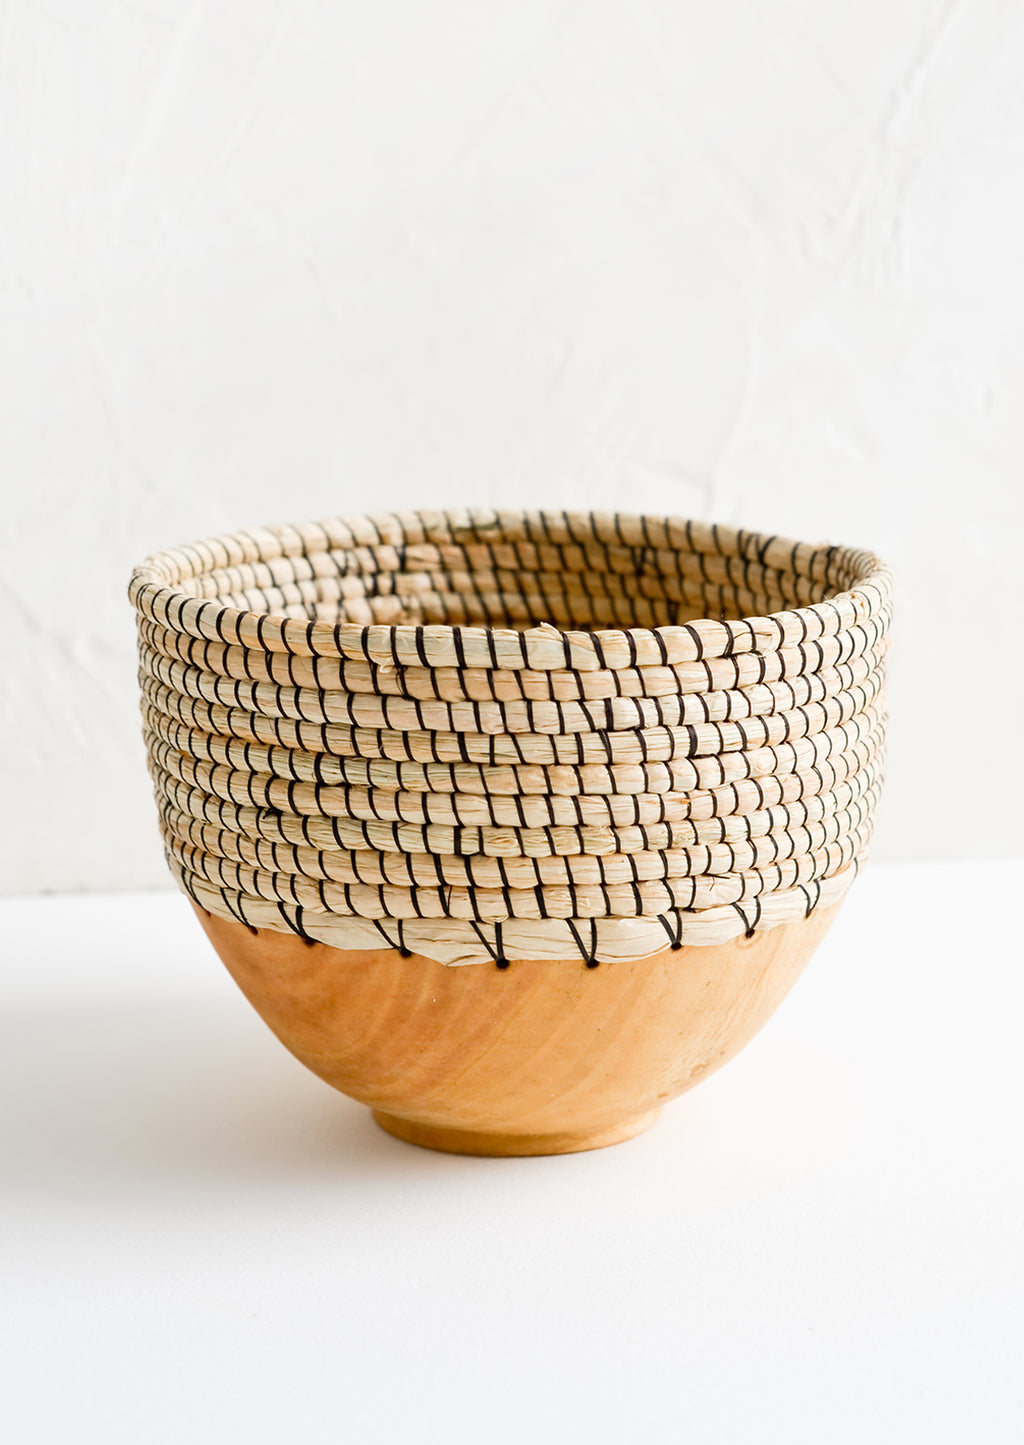 Small: A small bowl made from half wood and half woven grass with black thread.